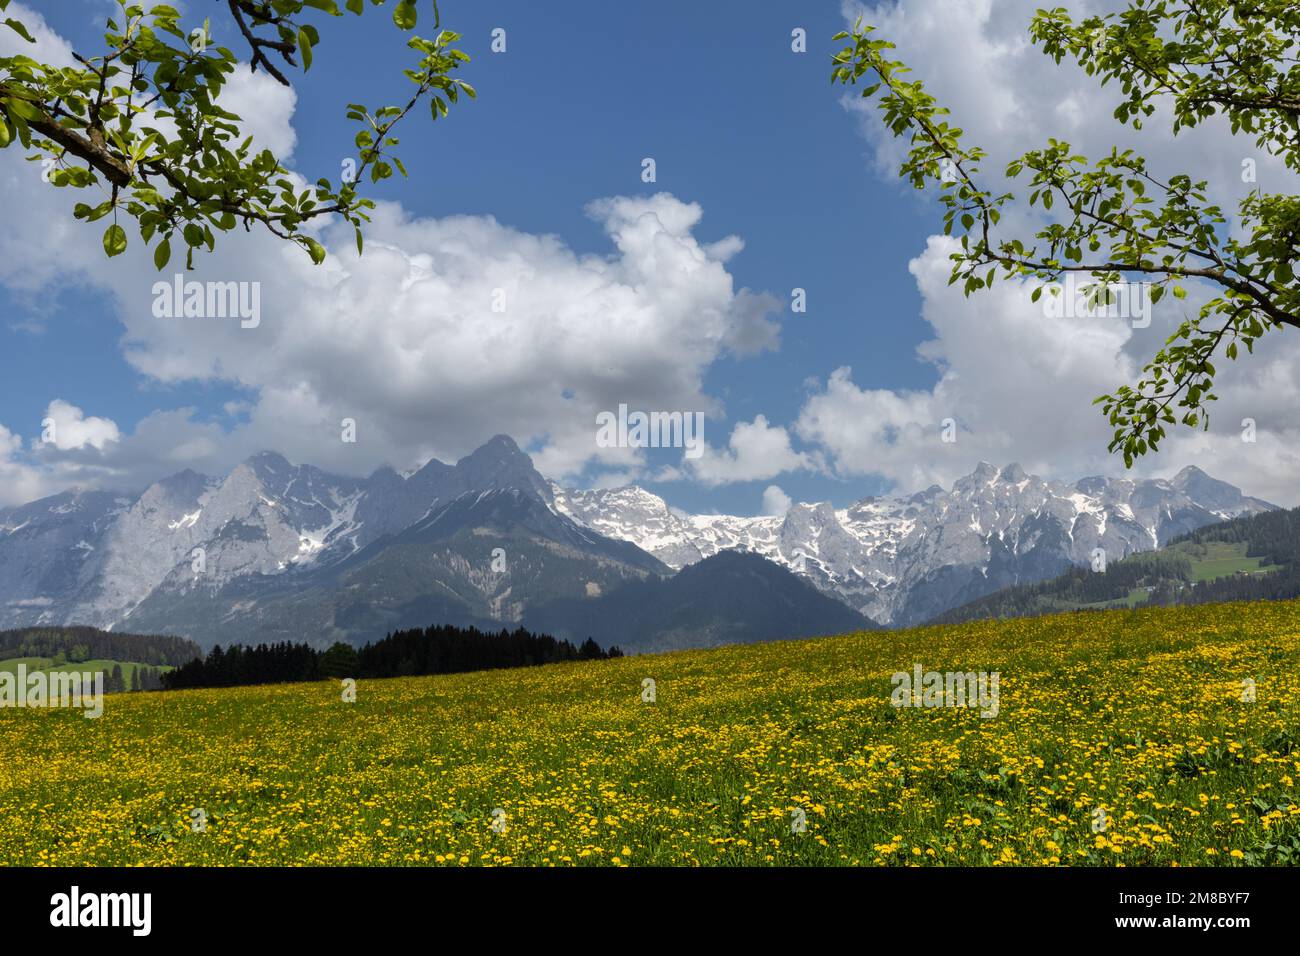 rural landscape with a flowering field against the backdrop of snowy mountains, Austria, Alps Stock Photo